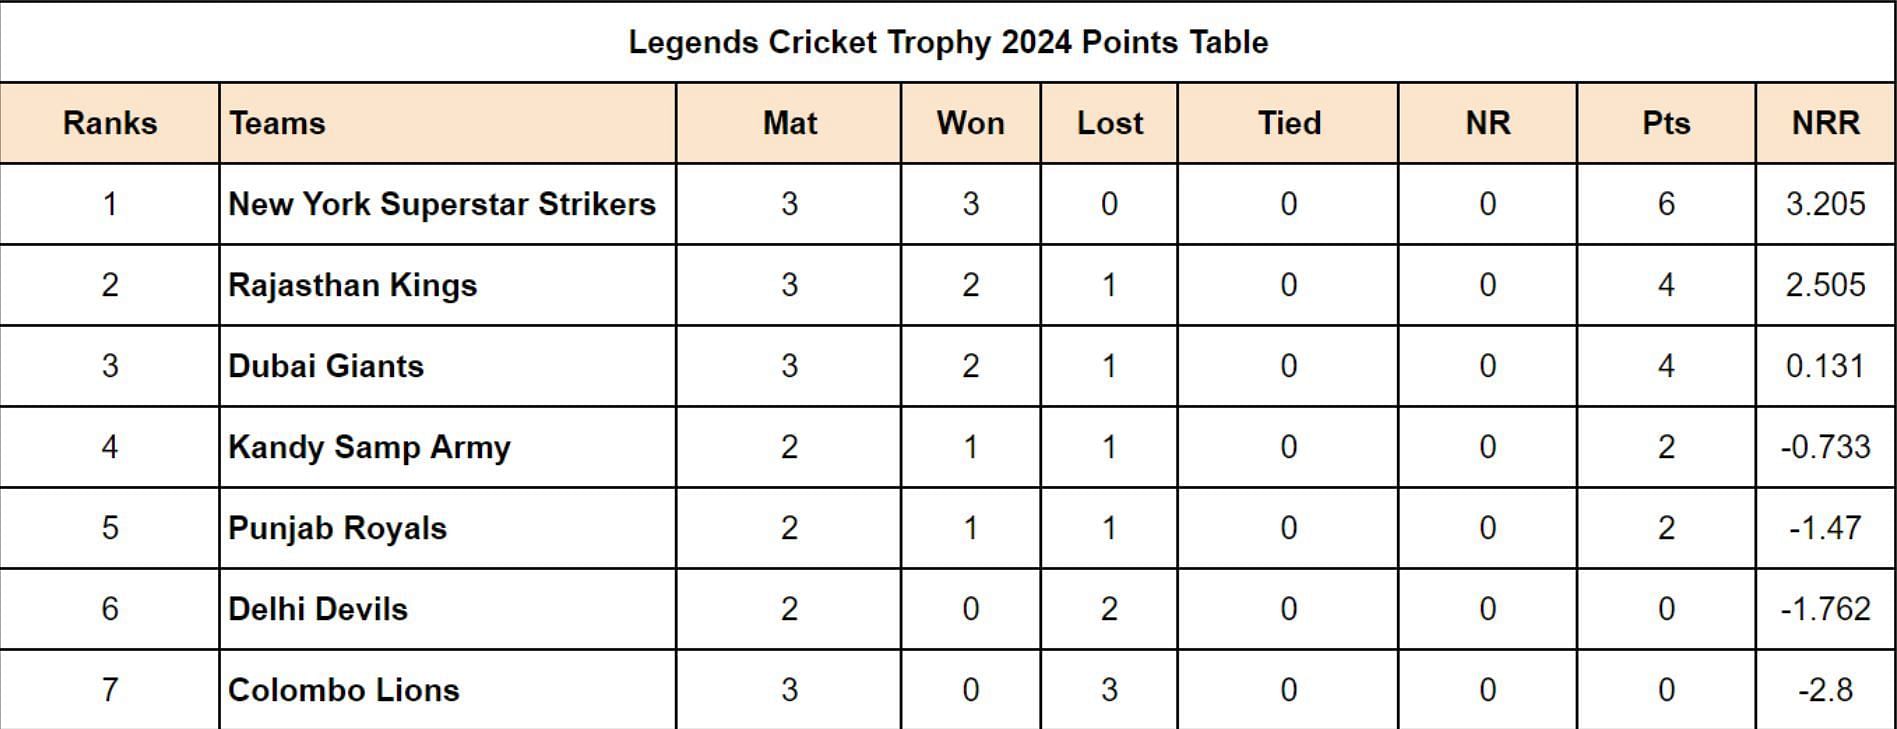 Legends Cricket Trophy 2024 Points Table Updated after Match 9